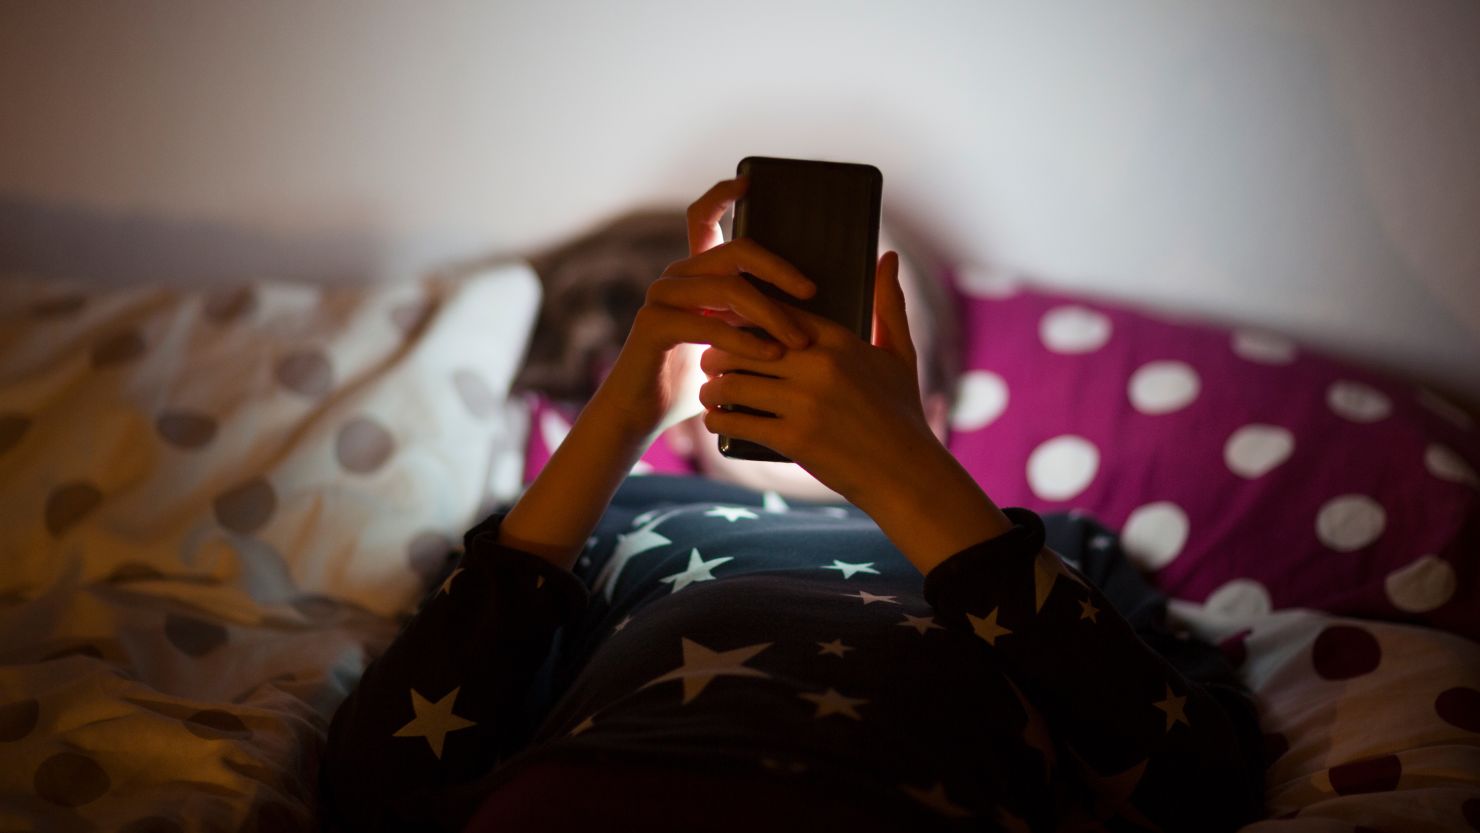 Girl lying on bed at night and using a mobile phone - stock photo